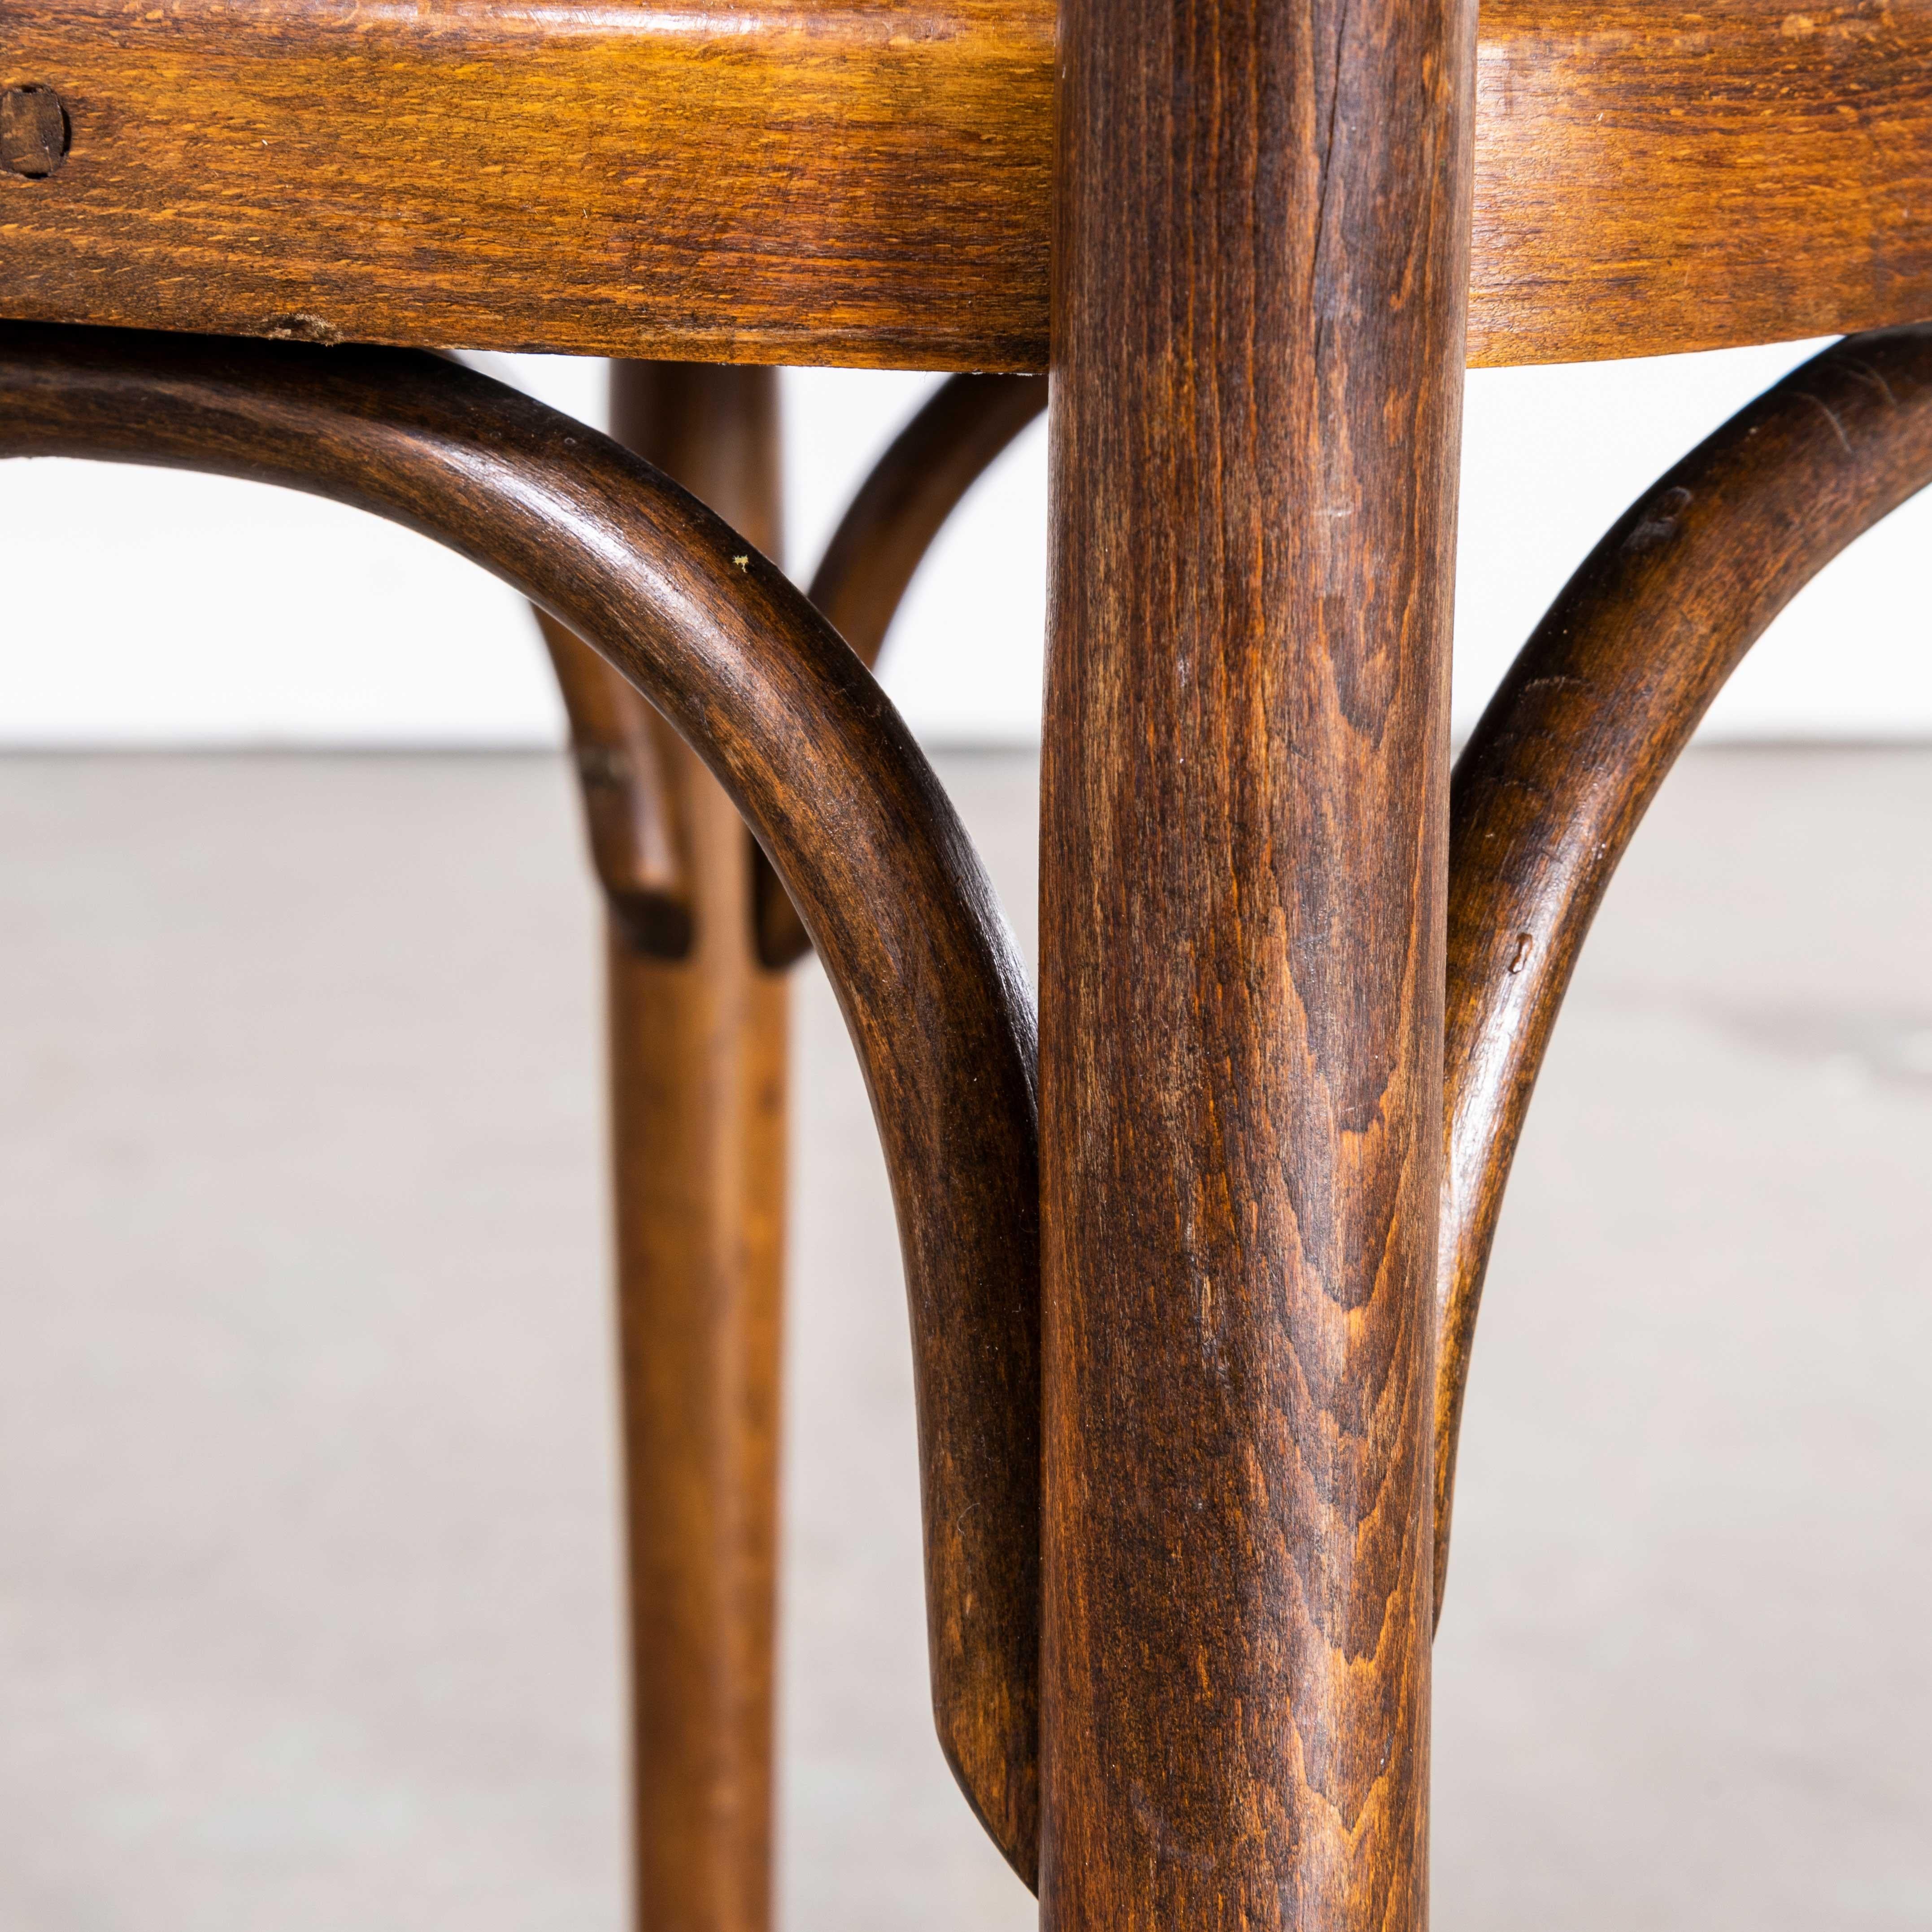 1940’s Horgen Glarus Bentwood Dining Chairs – Set Of Seven
1940’s Horgen Glarus Bentwood Dining Chairs – Set Of Seven. This rare Thonet style product is one of the best sets of chairs we have sourced from Horgen Glarus the oldest surviving